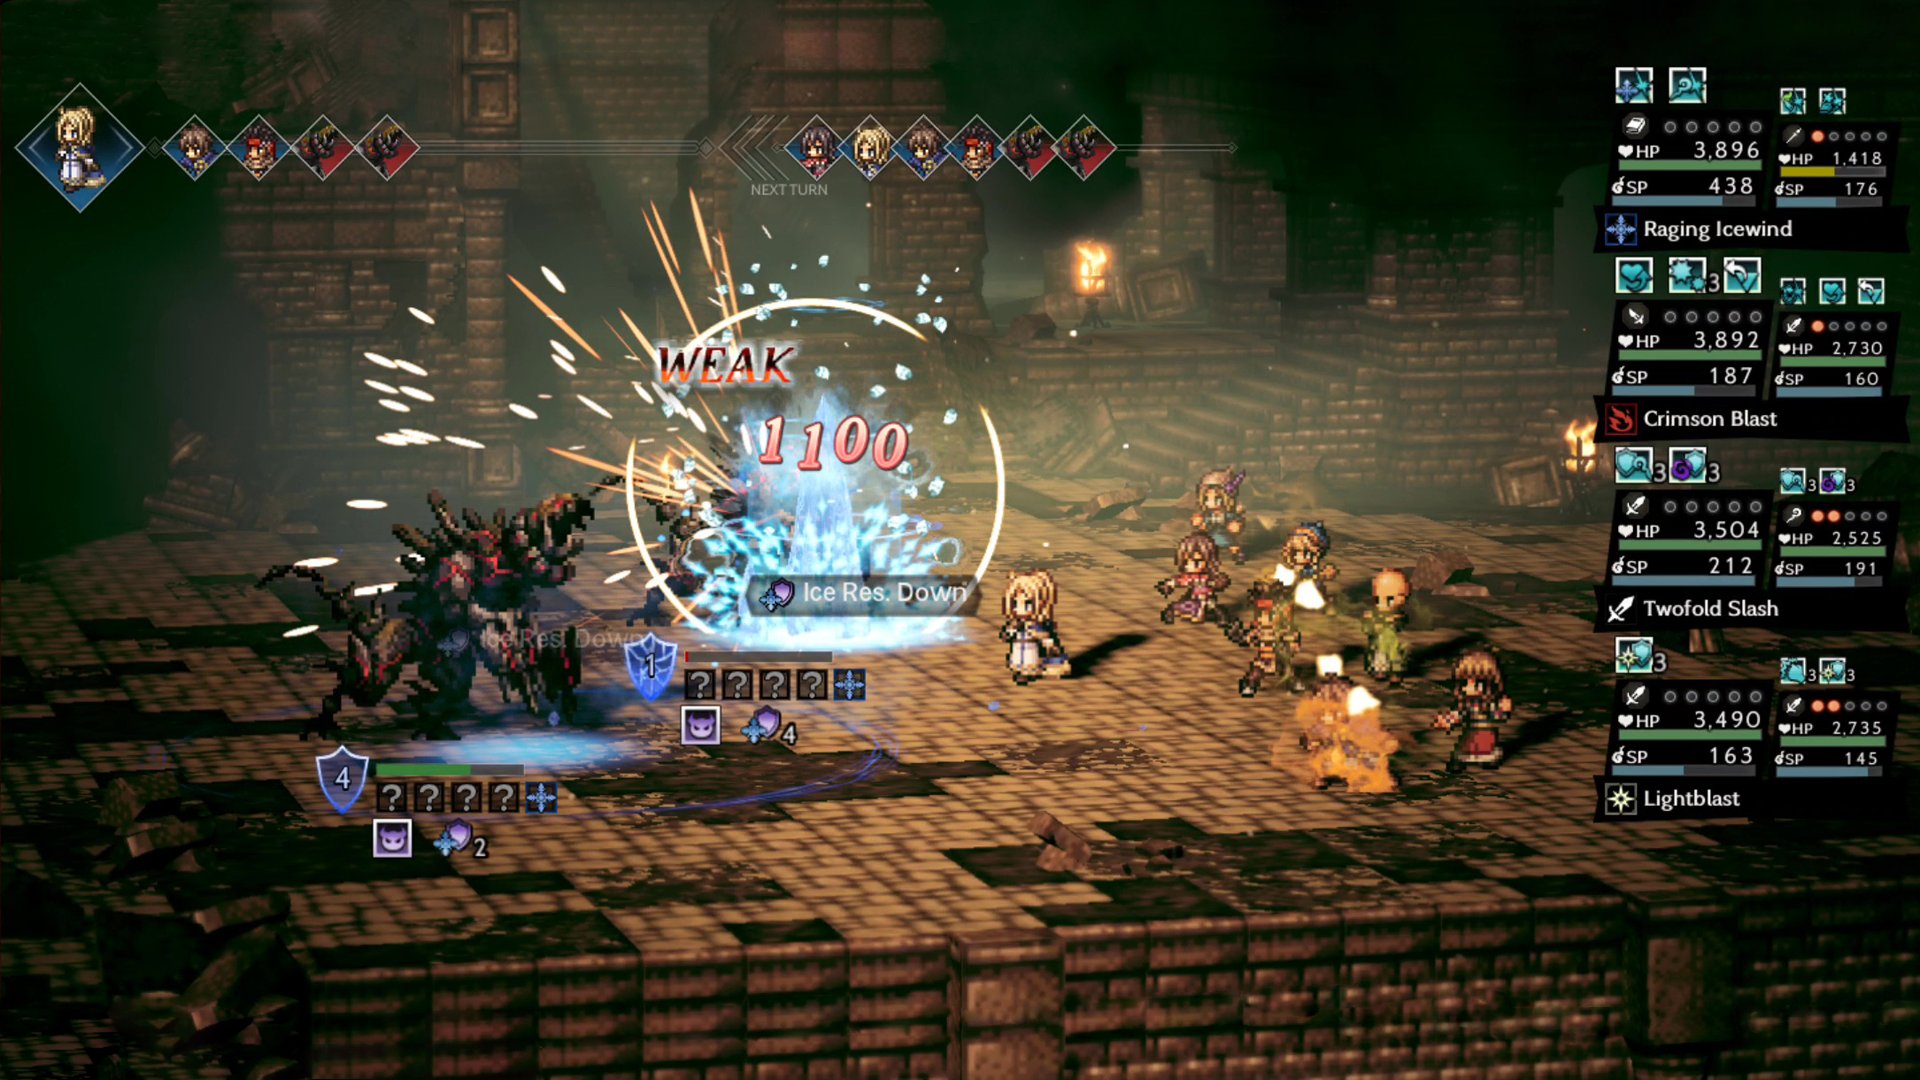 Octopath-Traveller-Heroes-of-the-Continent-android-ios Octopath Traveler: Champions of the Continent em pré-registro no Android